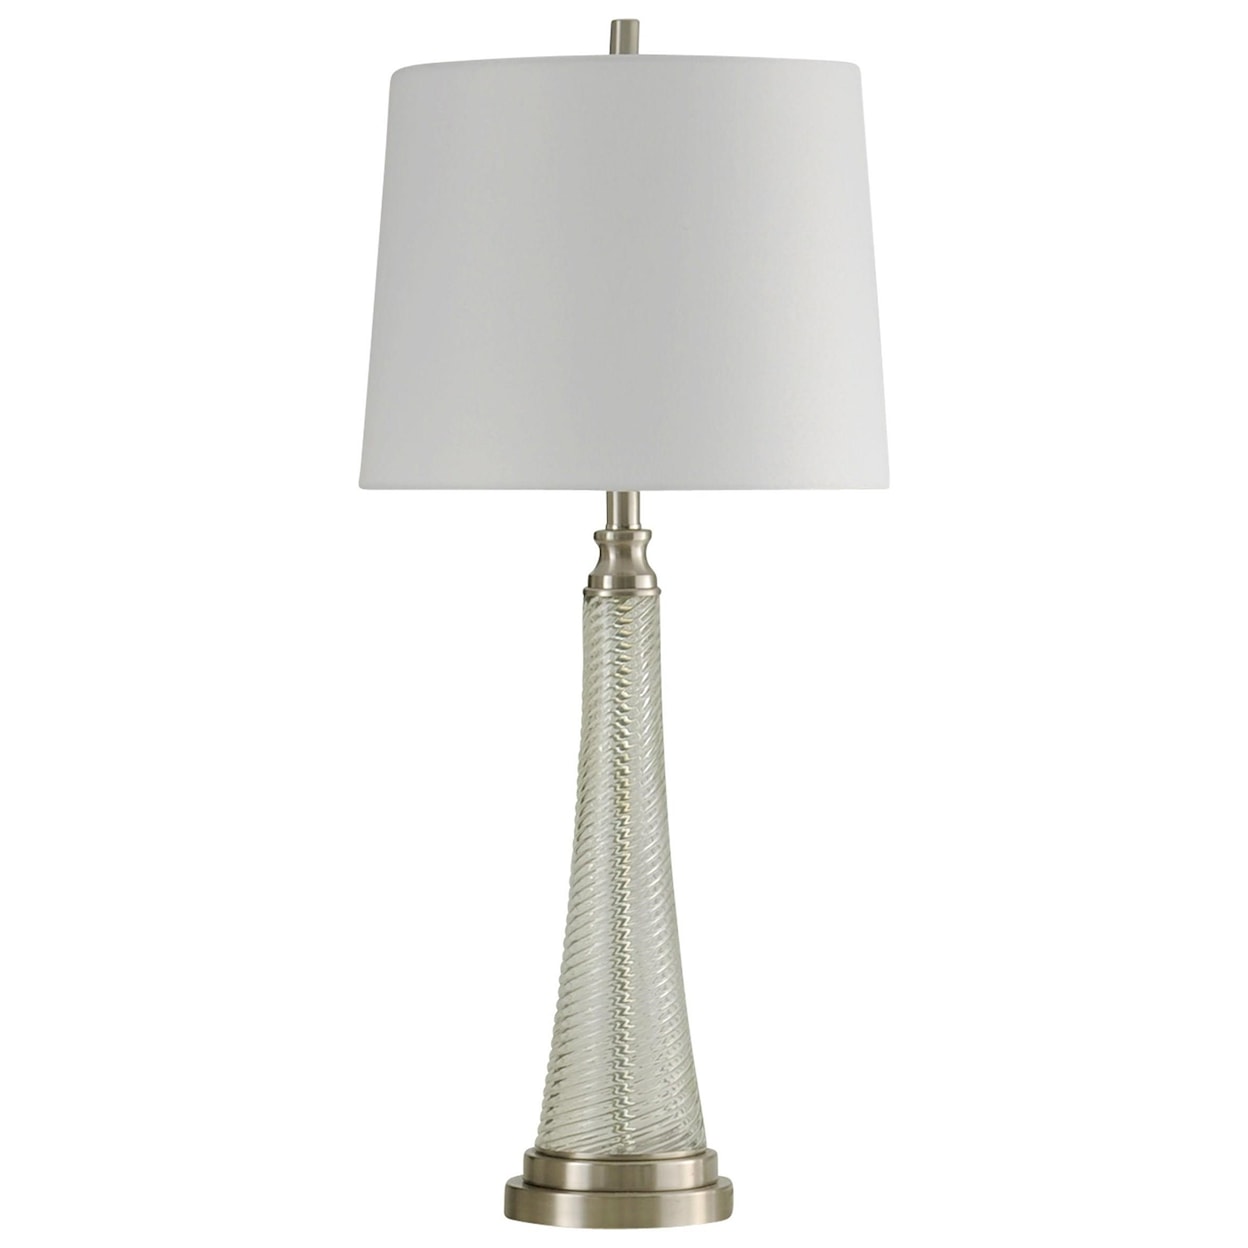 StyleCraft Lamps Table Lamp with Brushed Steel Accents